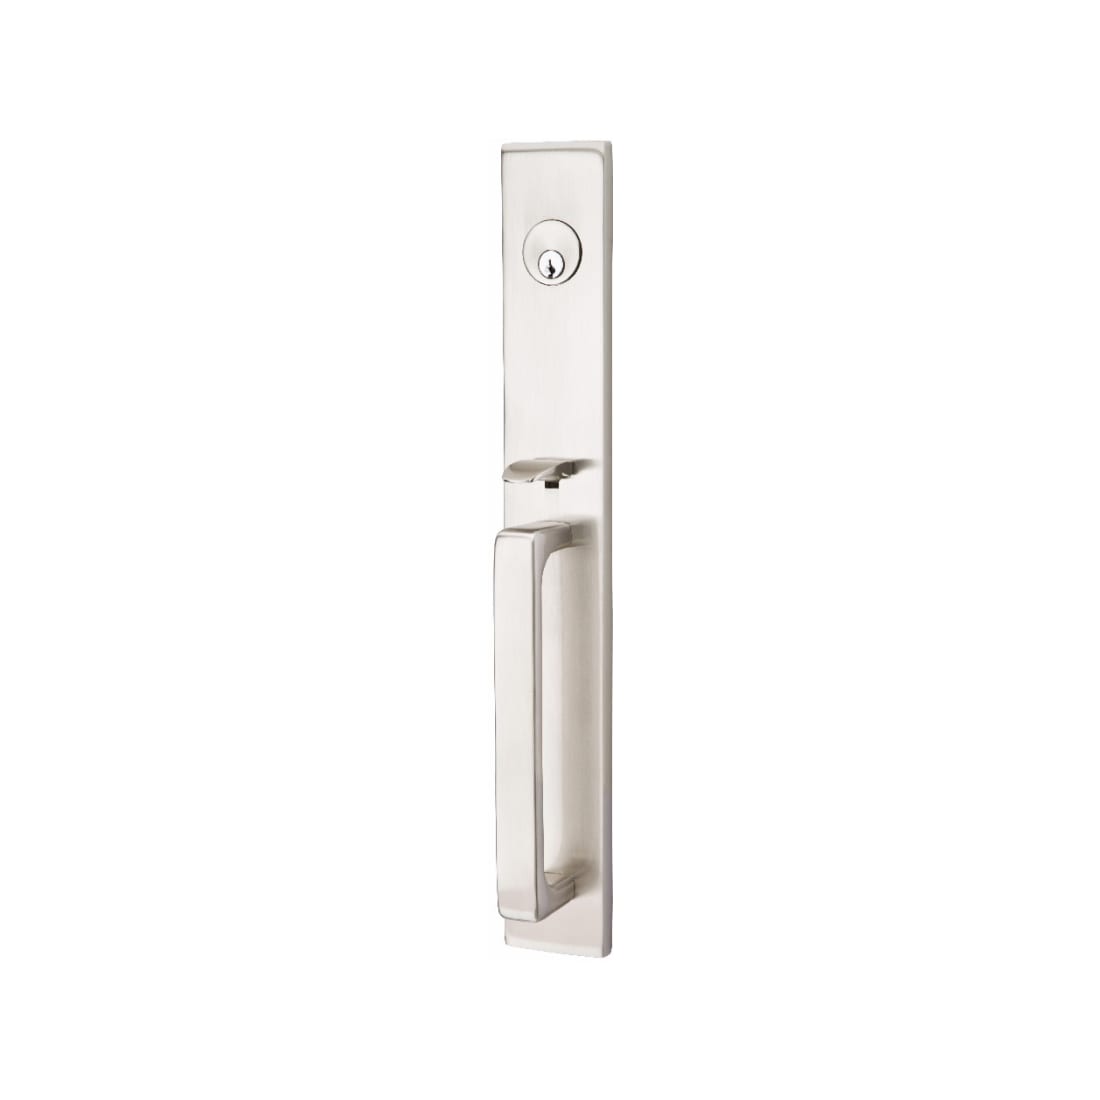 EMTEK Mormont Lugano Entry Set with Matching Finish Diamond Crystal Knob  Choice of Left/Right Handing Available in Finishes F20334875CKLHUS4 